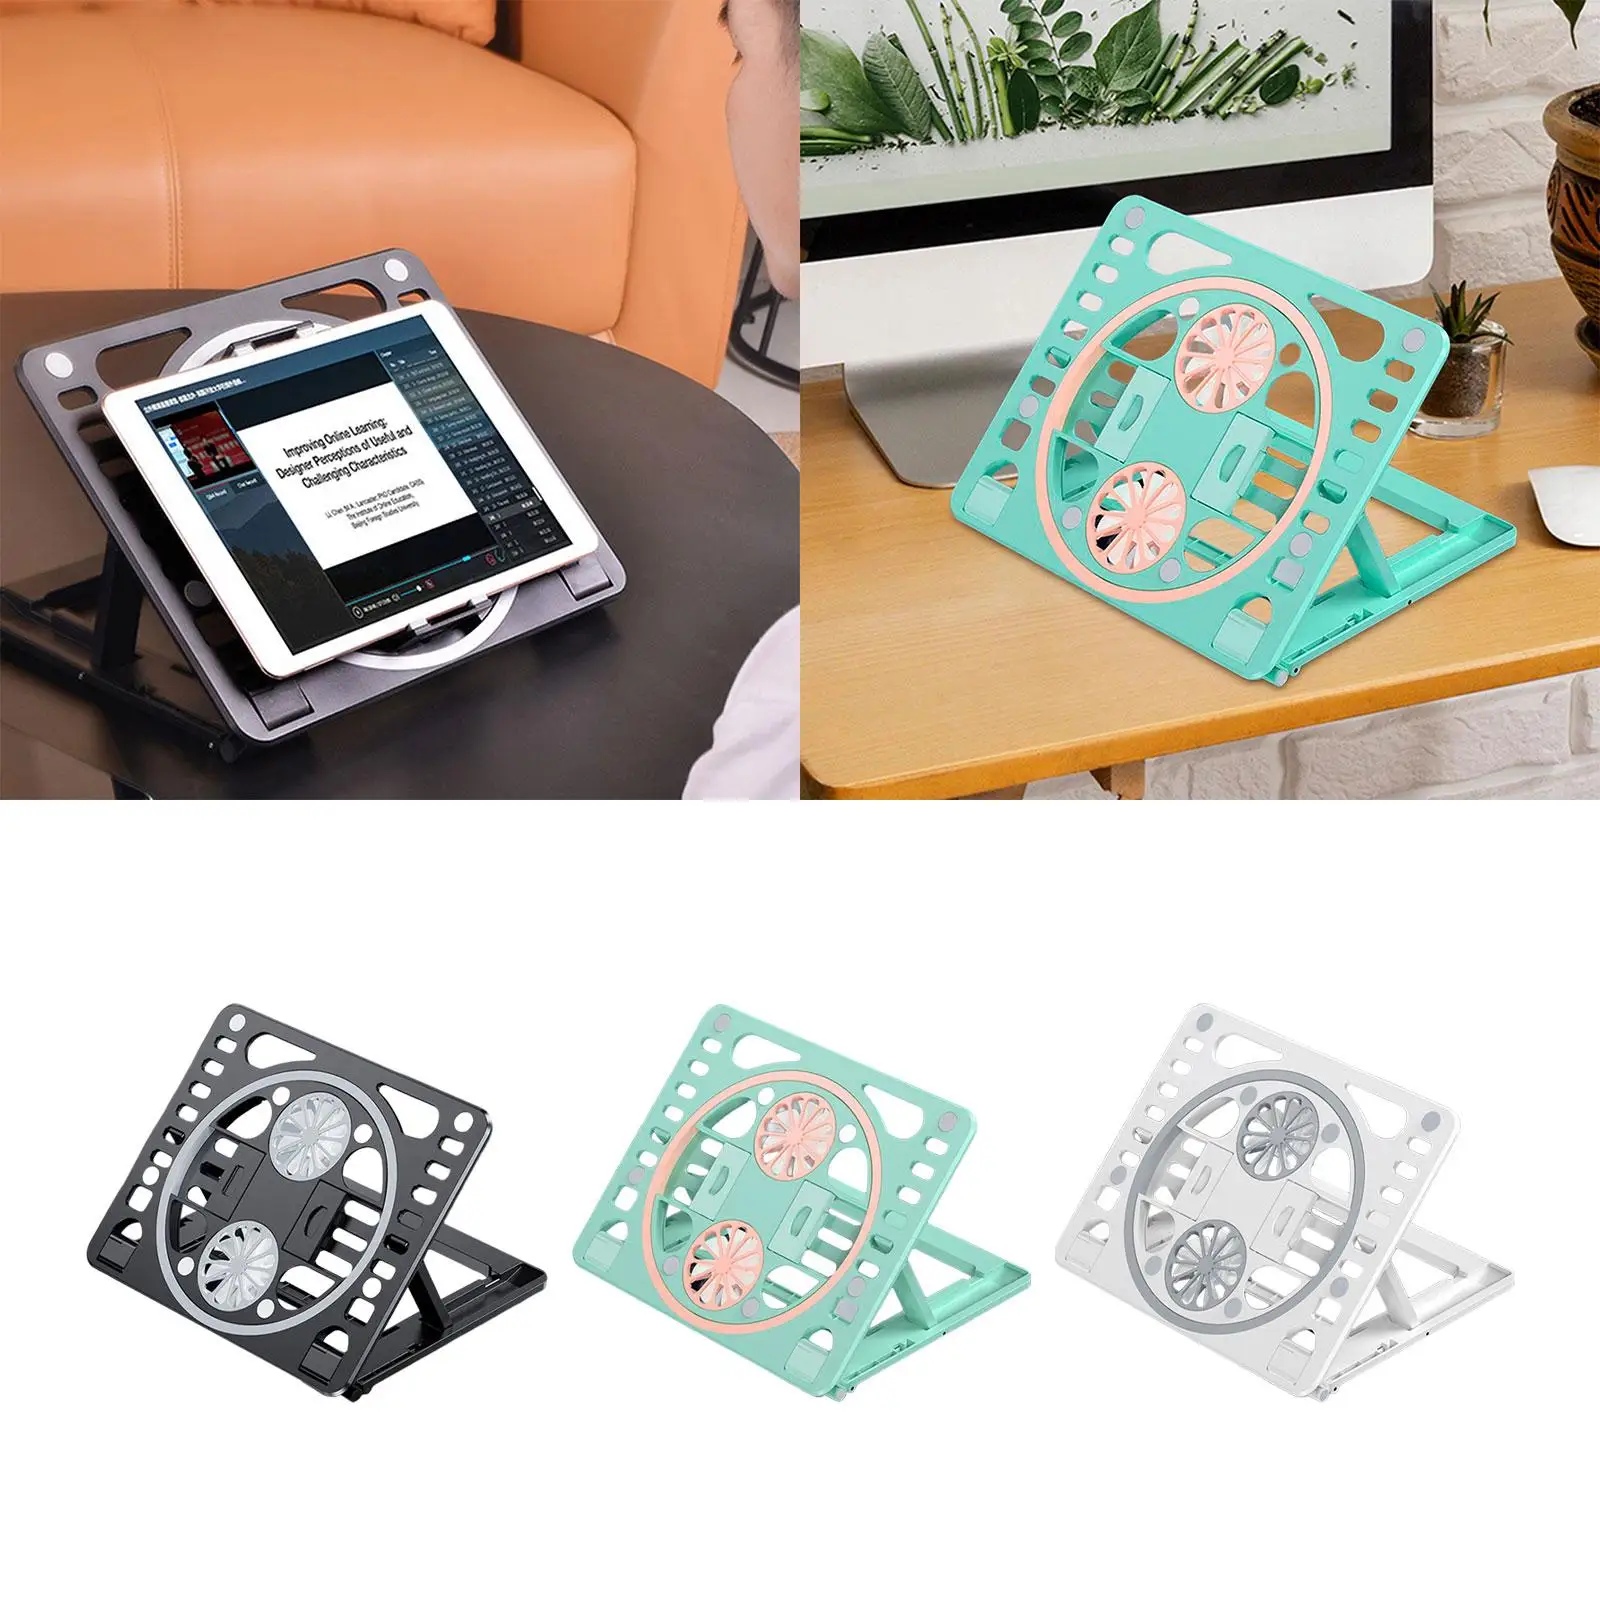 Laptop Cooling Pad USB Powered 6 Height Adjustment with 2 Quiet Fans Portable Laptop Cooling Fan Stand for Desk Office Home